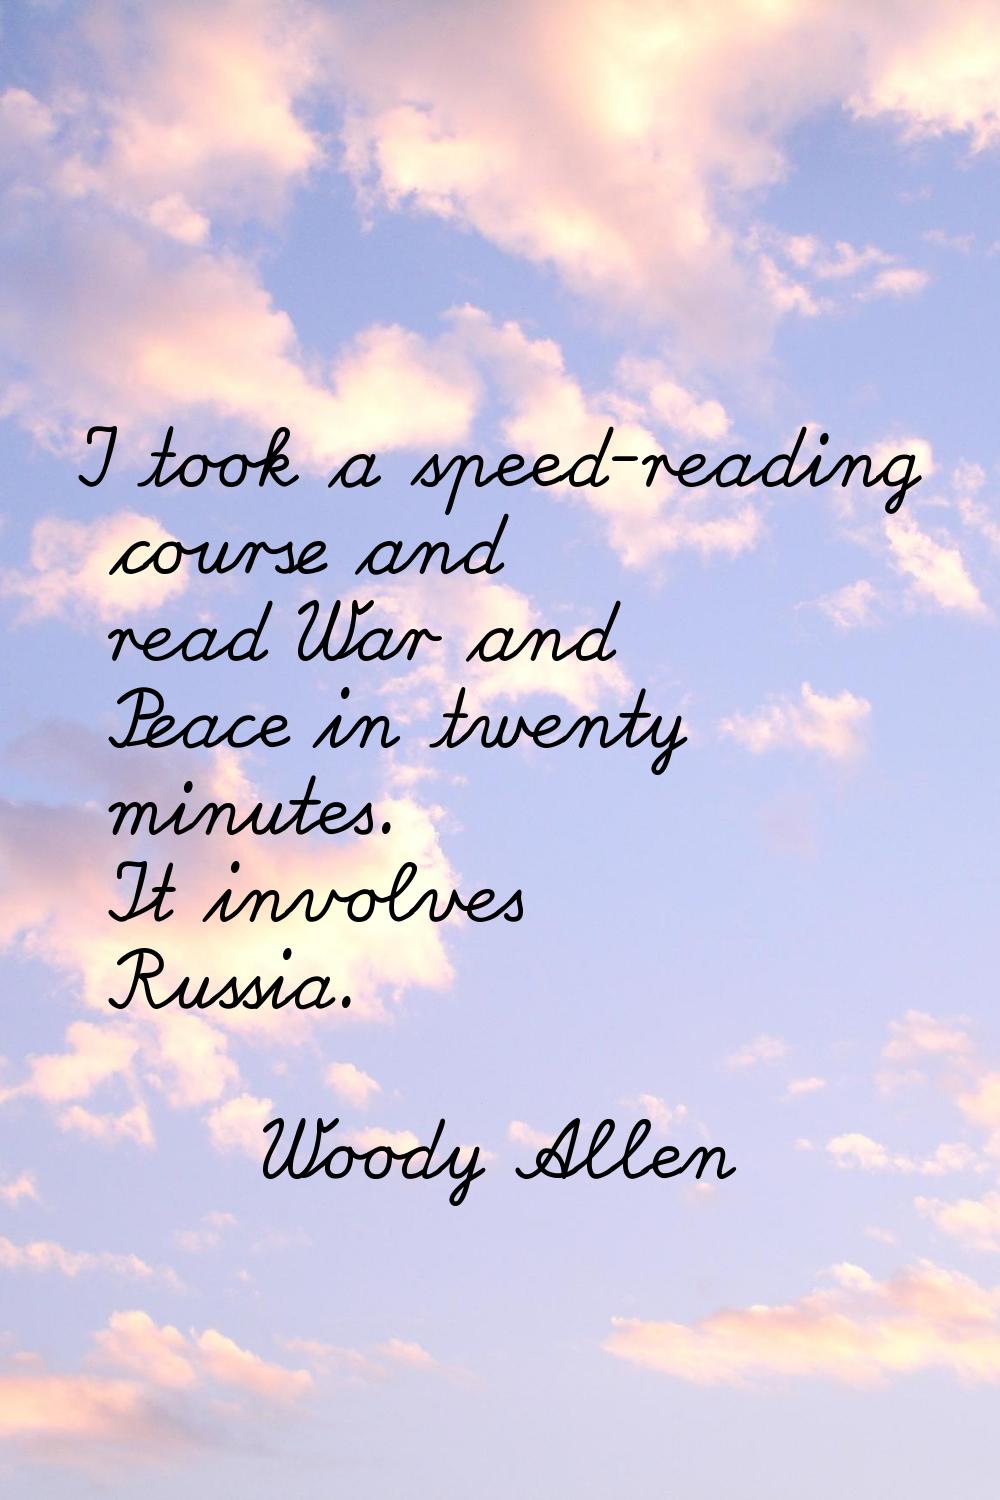 I took a speed-reading course and read War and Peace in twenty minutes. It involves Russia.